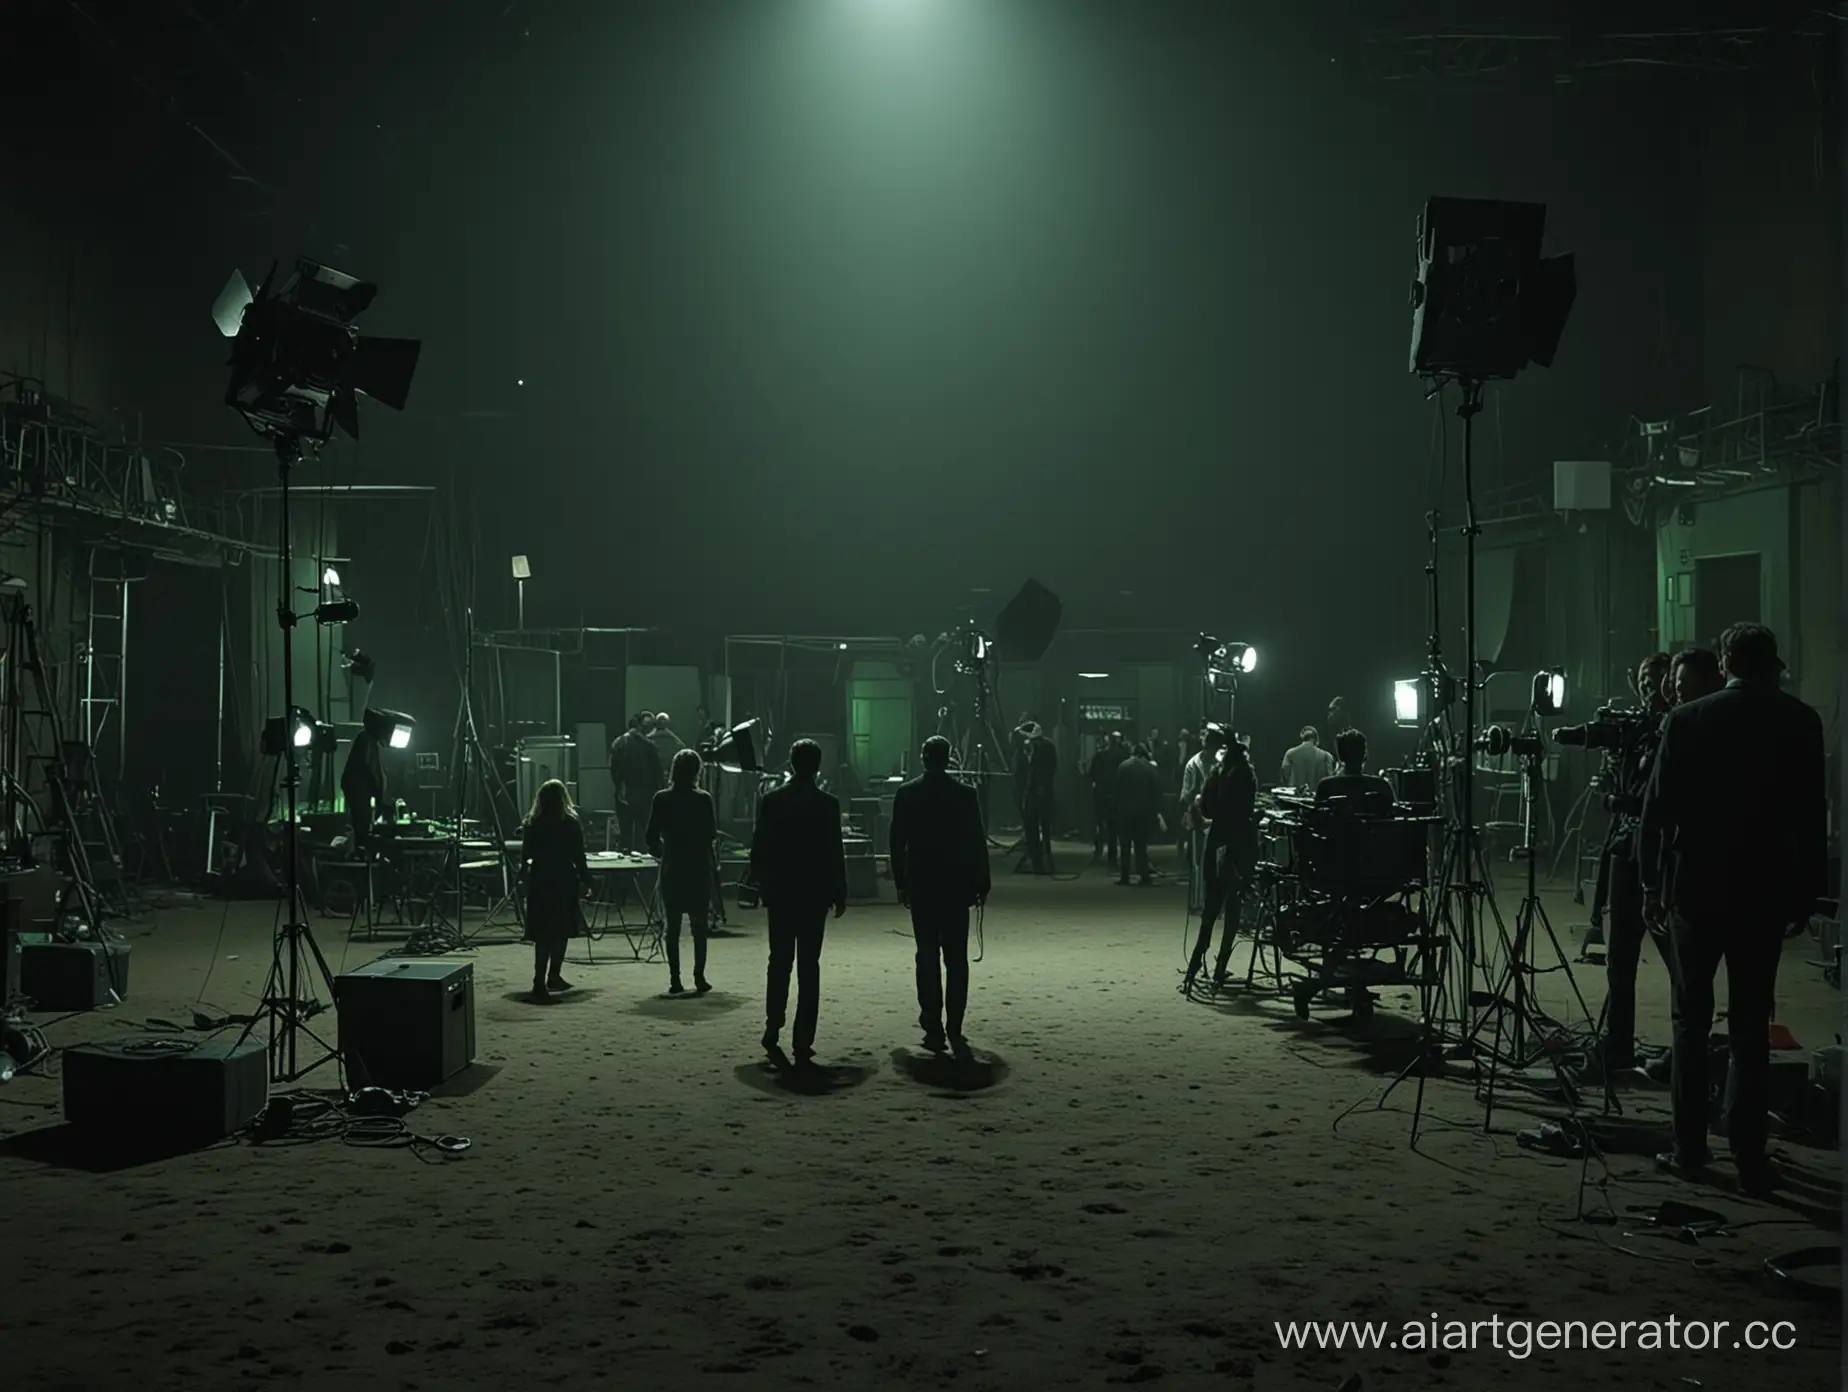 Mysterious-Film-Set-with-Green-Lighting-and-Cast